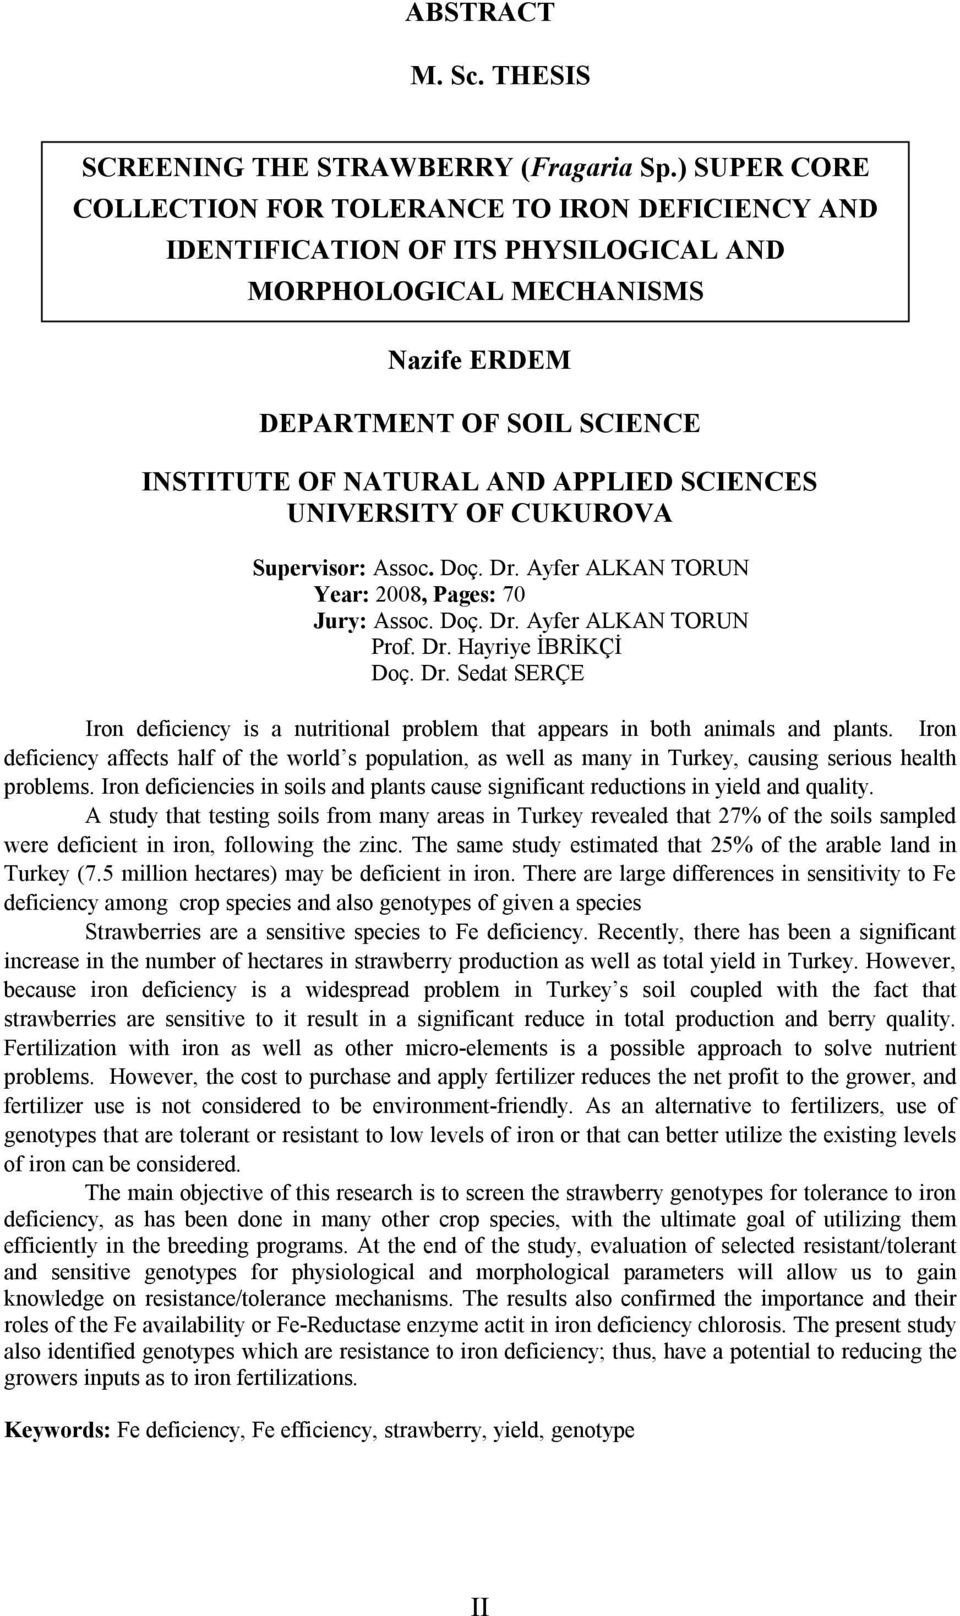 SCIENCES UNIVERSITY OF CUKUROVA Supervisor: Assoc. Doç. Dr. Ayfer ALKAN TORUN Year: 2008, Pages: 70 Jury: Assoc. Doç. Dr. Ayfer ALKAN TORUN Prof. Dr. Hayriye İBRİKÇİ Doç. Dr. Sedat SERÇE Iron deficiency is a nutritional problem that appears in both animals and plants.